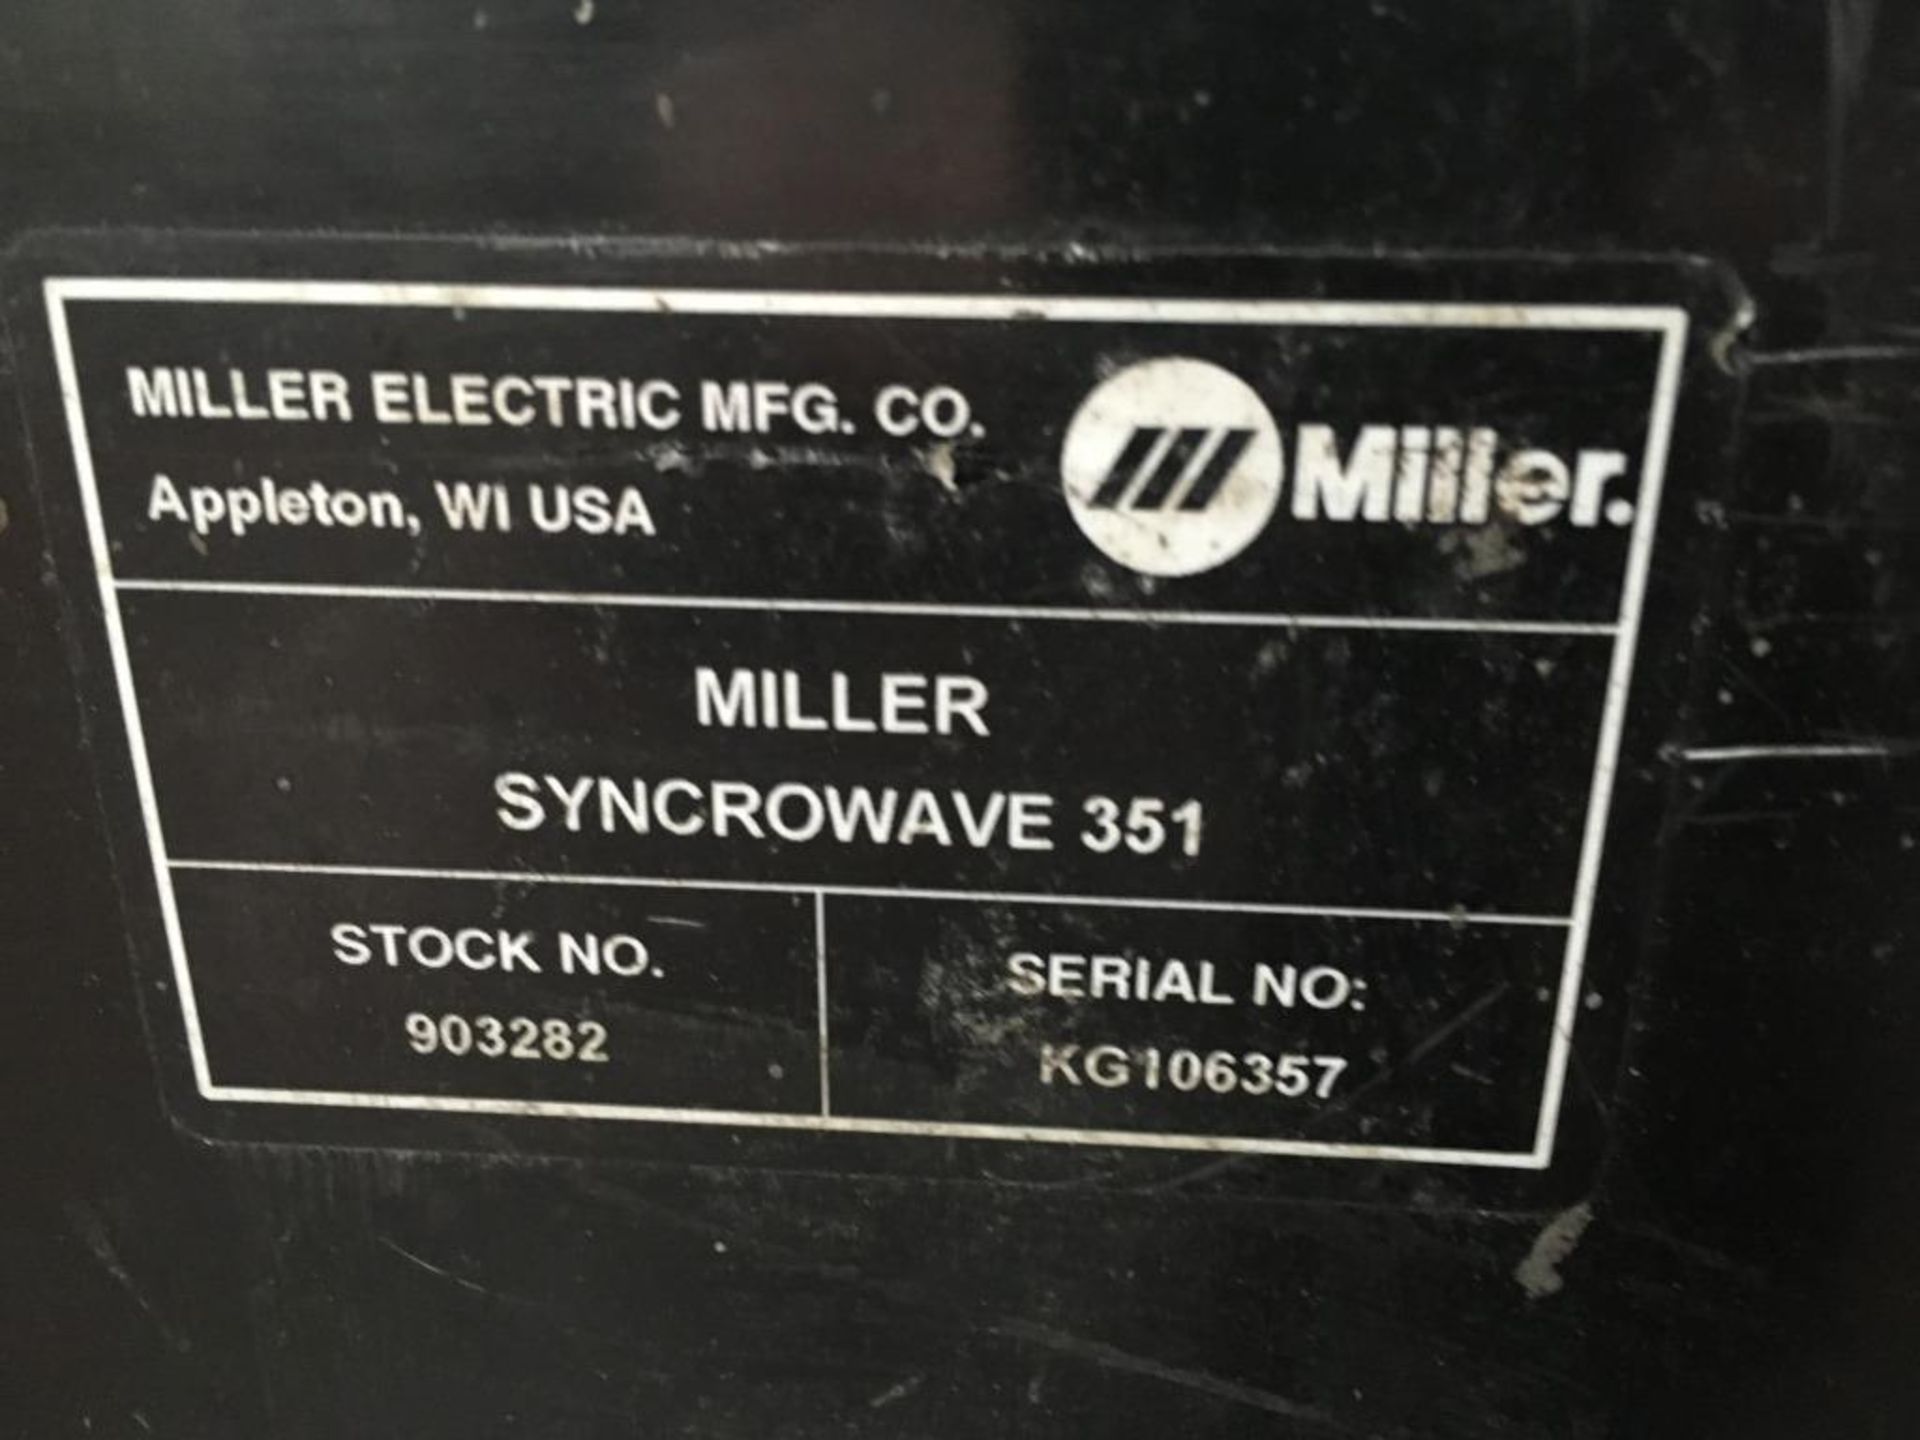 Miller Syncrowave 351 ACDC welding power source, Serial No. KG106357, with TA XC600 water cooler - Image 3 of 7